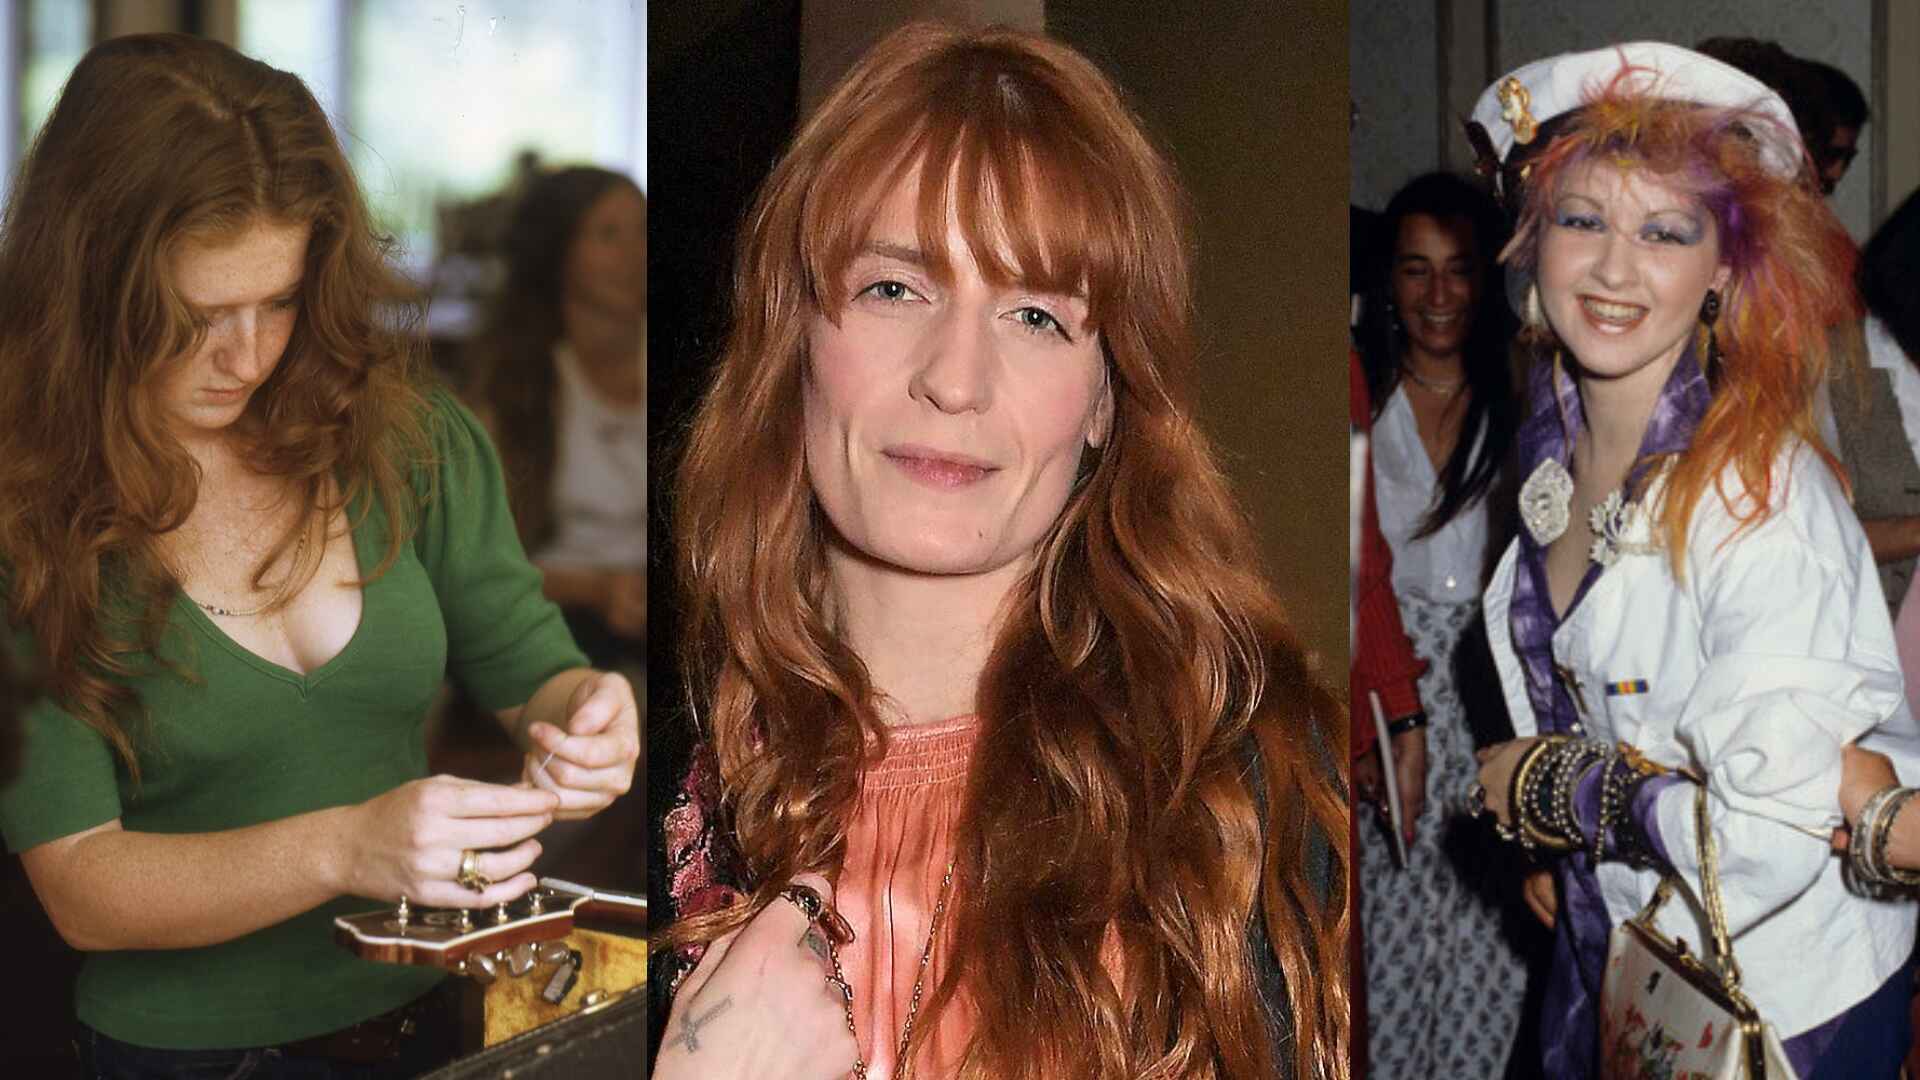 The 5 Most Iconic Red Head Female Singers Of All Time